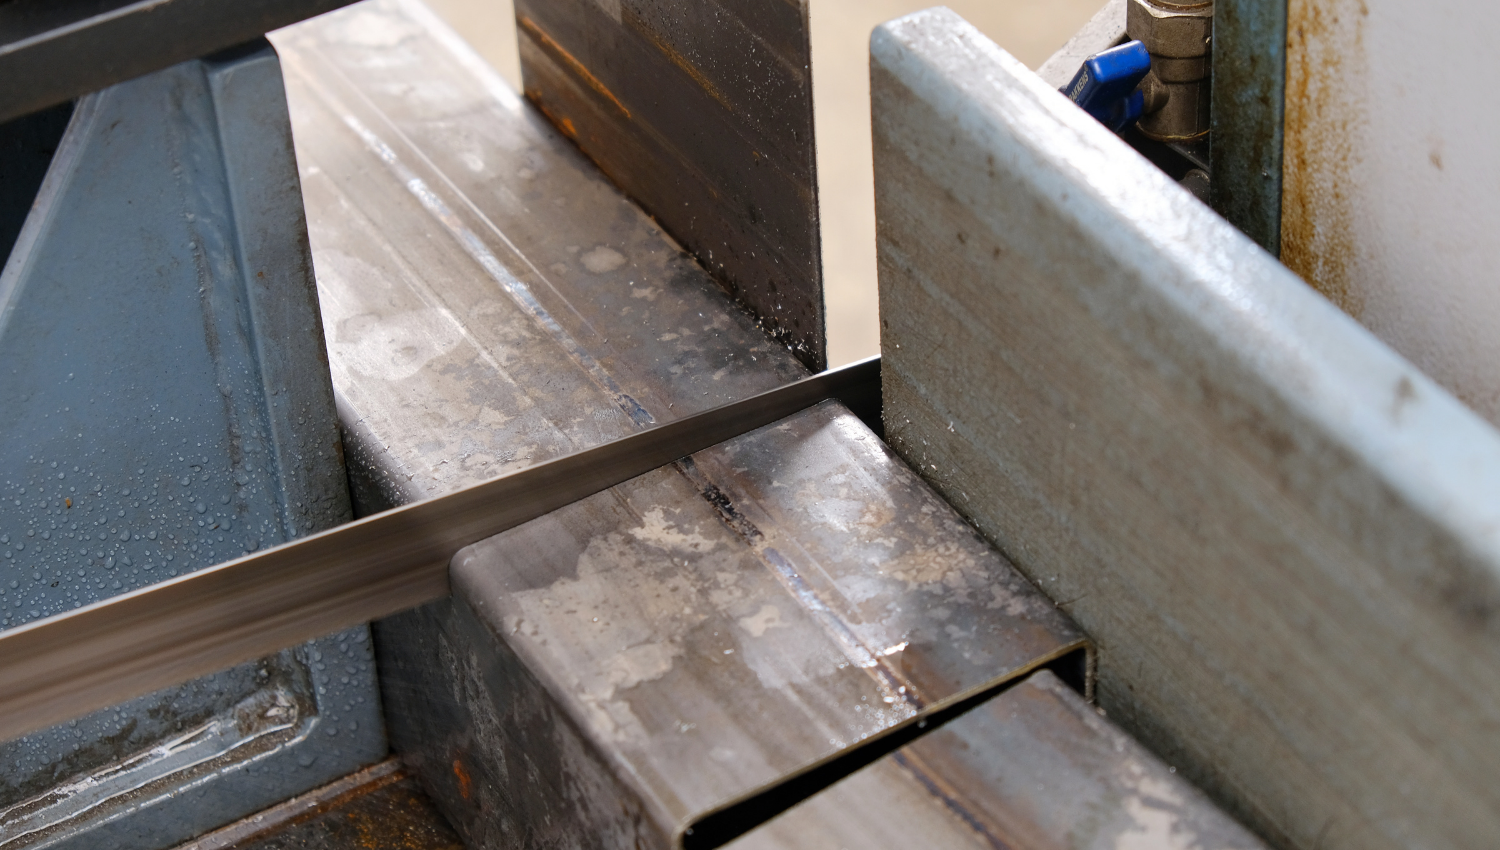 Metal Fabrication and Welding - What’s the Difference?